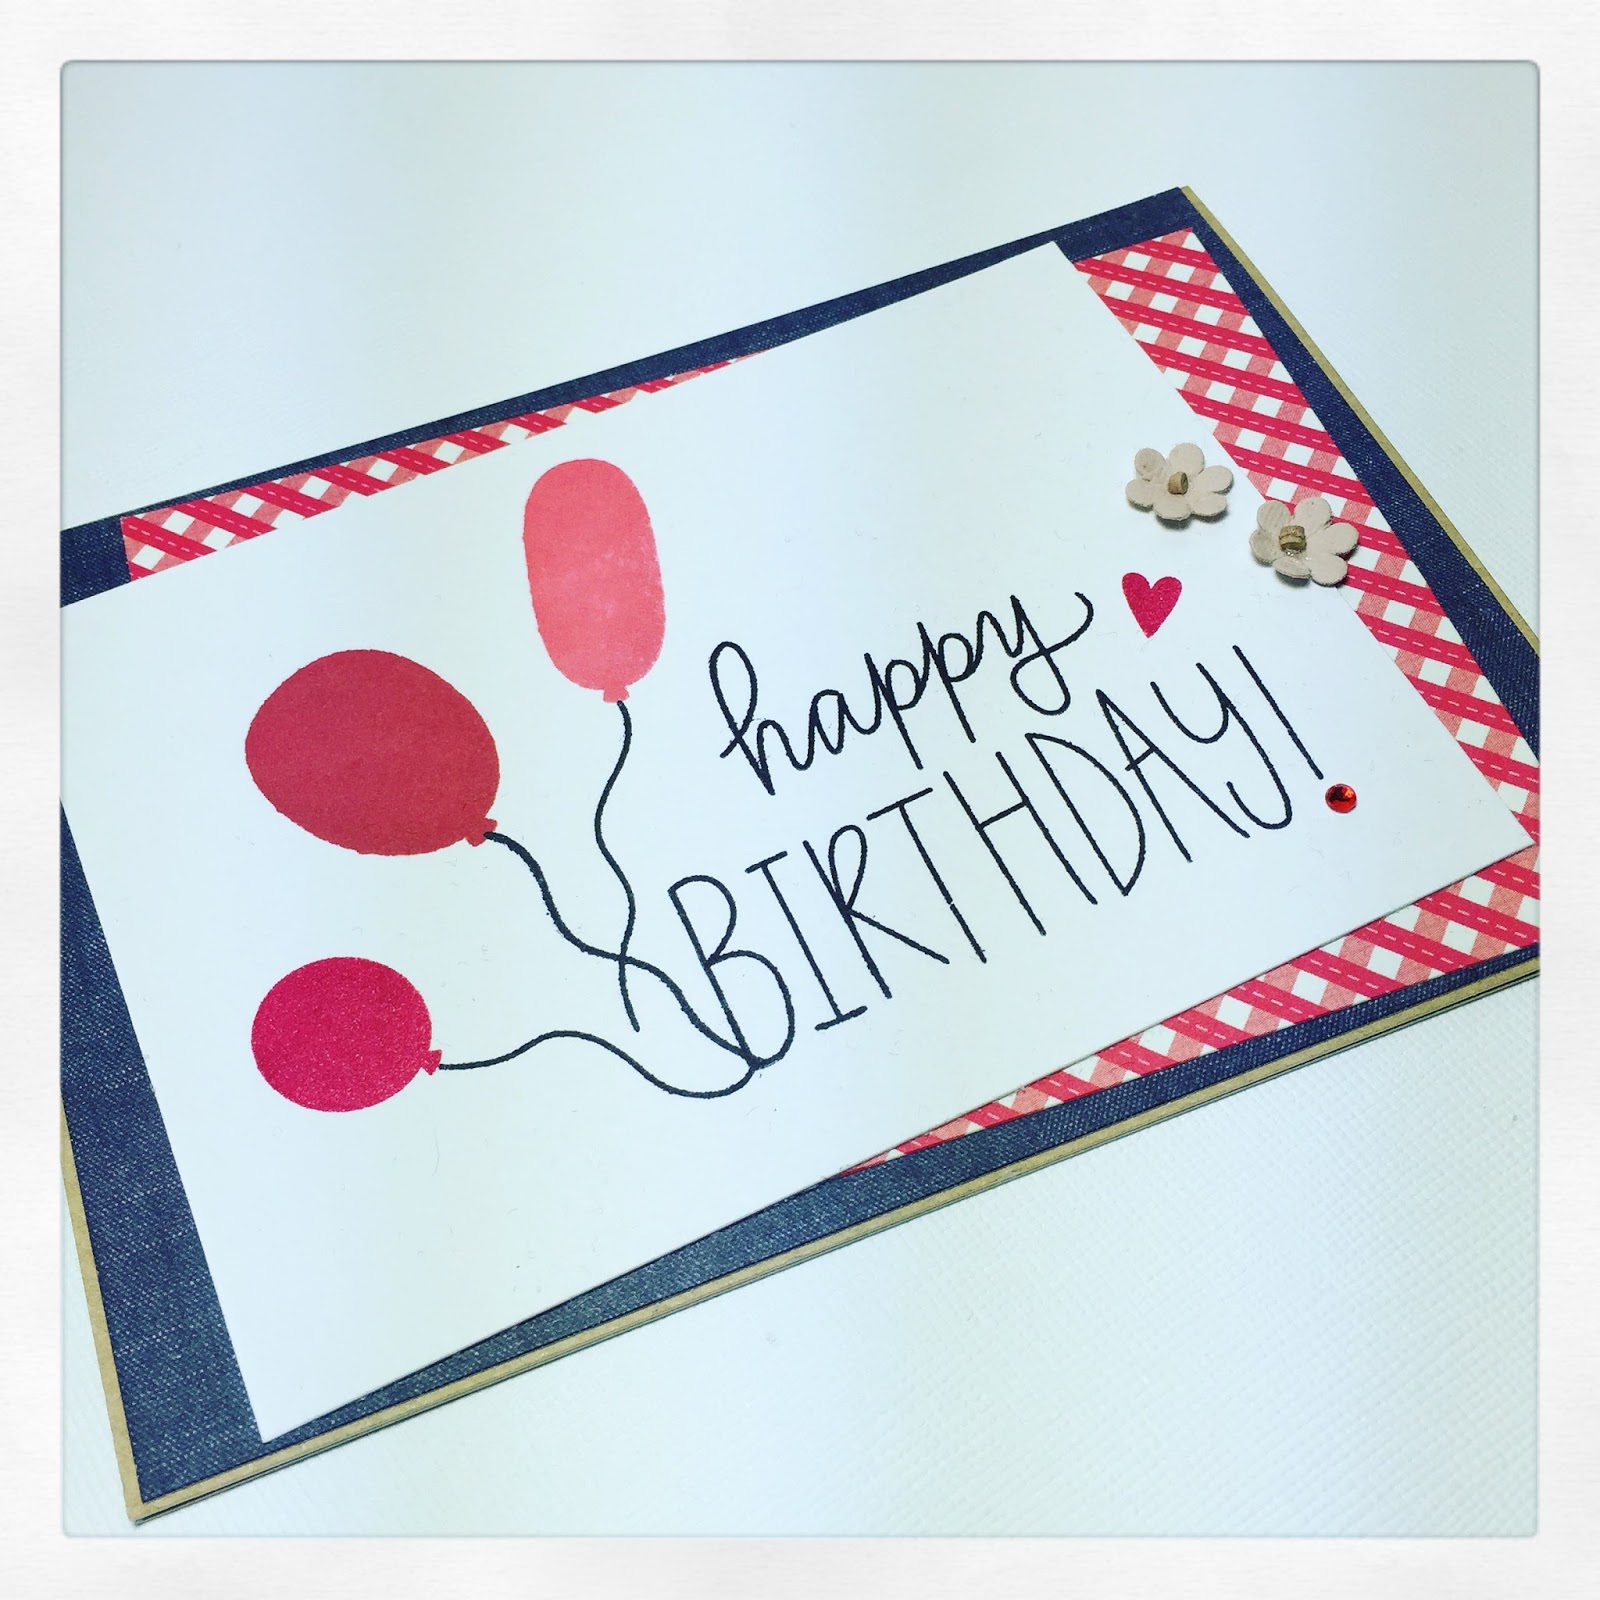 How To Design A Simple Birthday Card